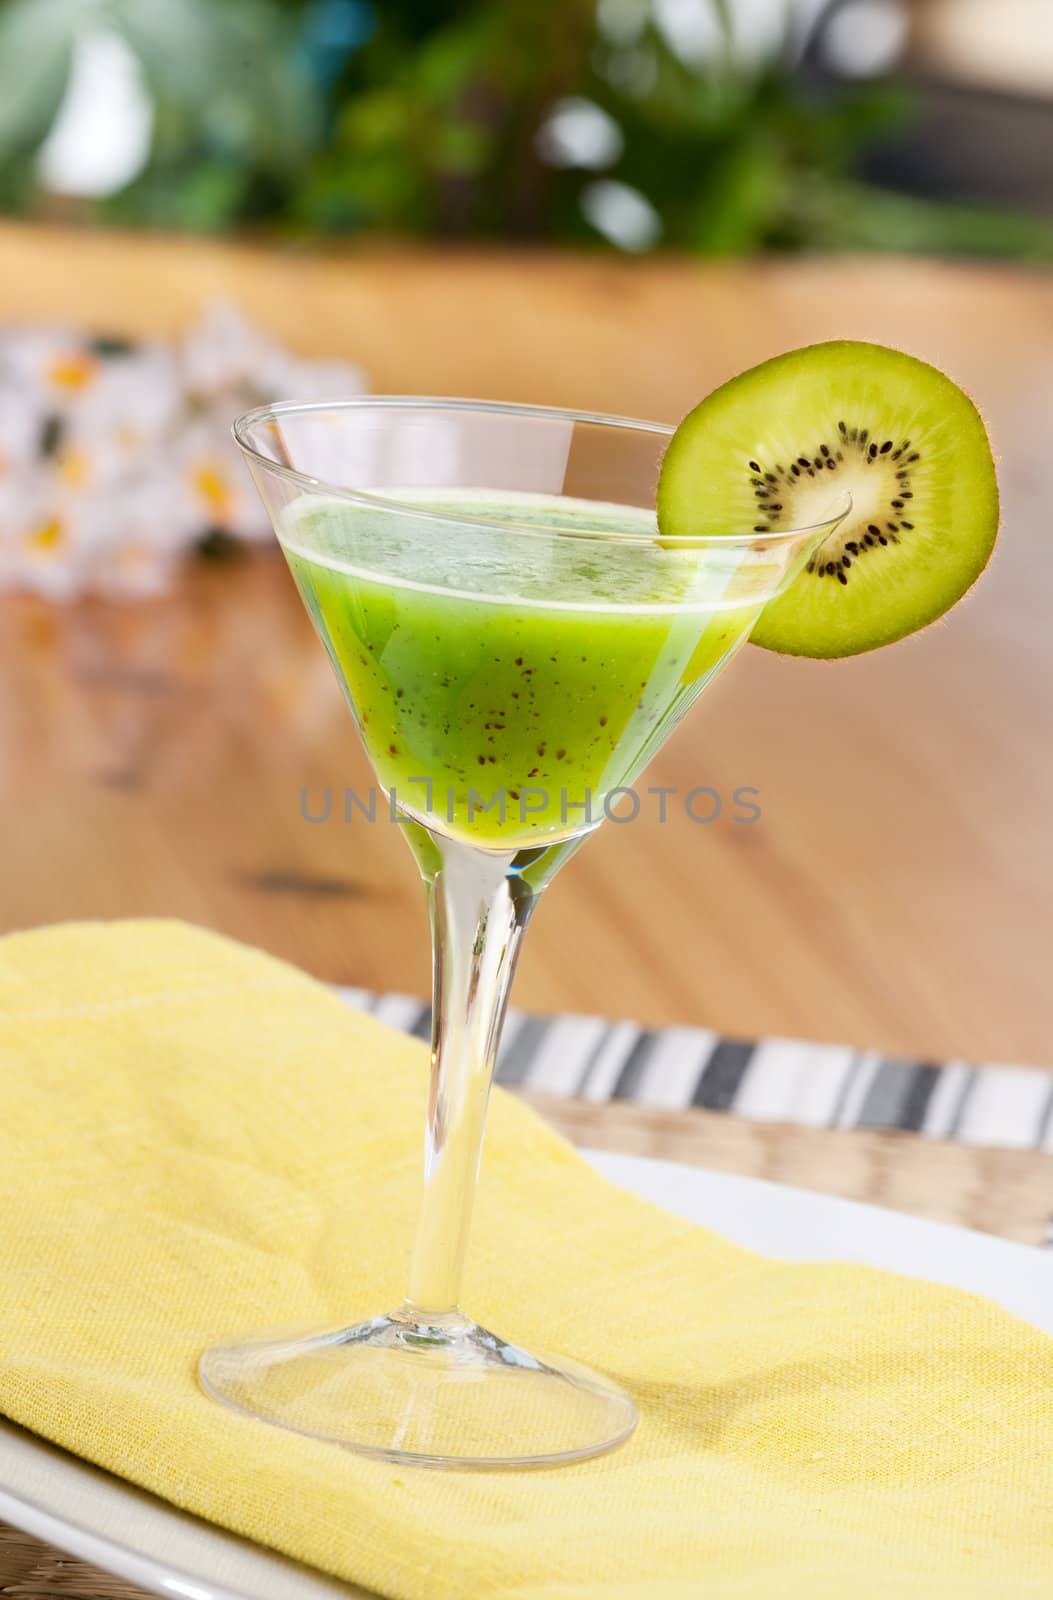 A kiwi based fruit drink in a martini glass